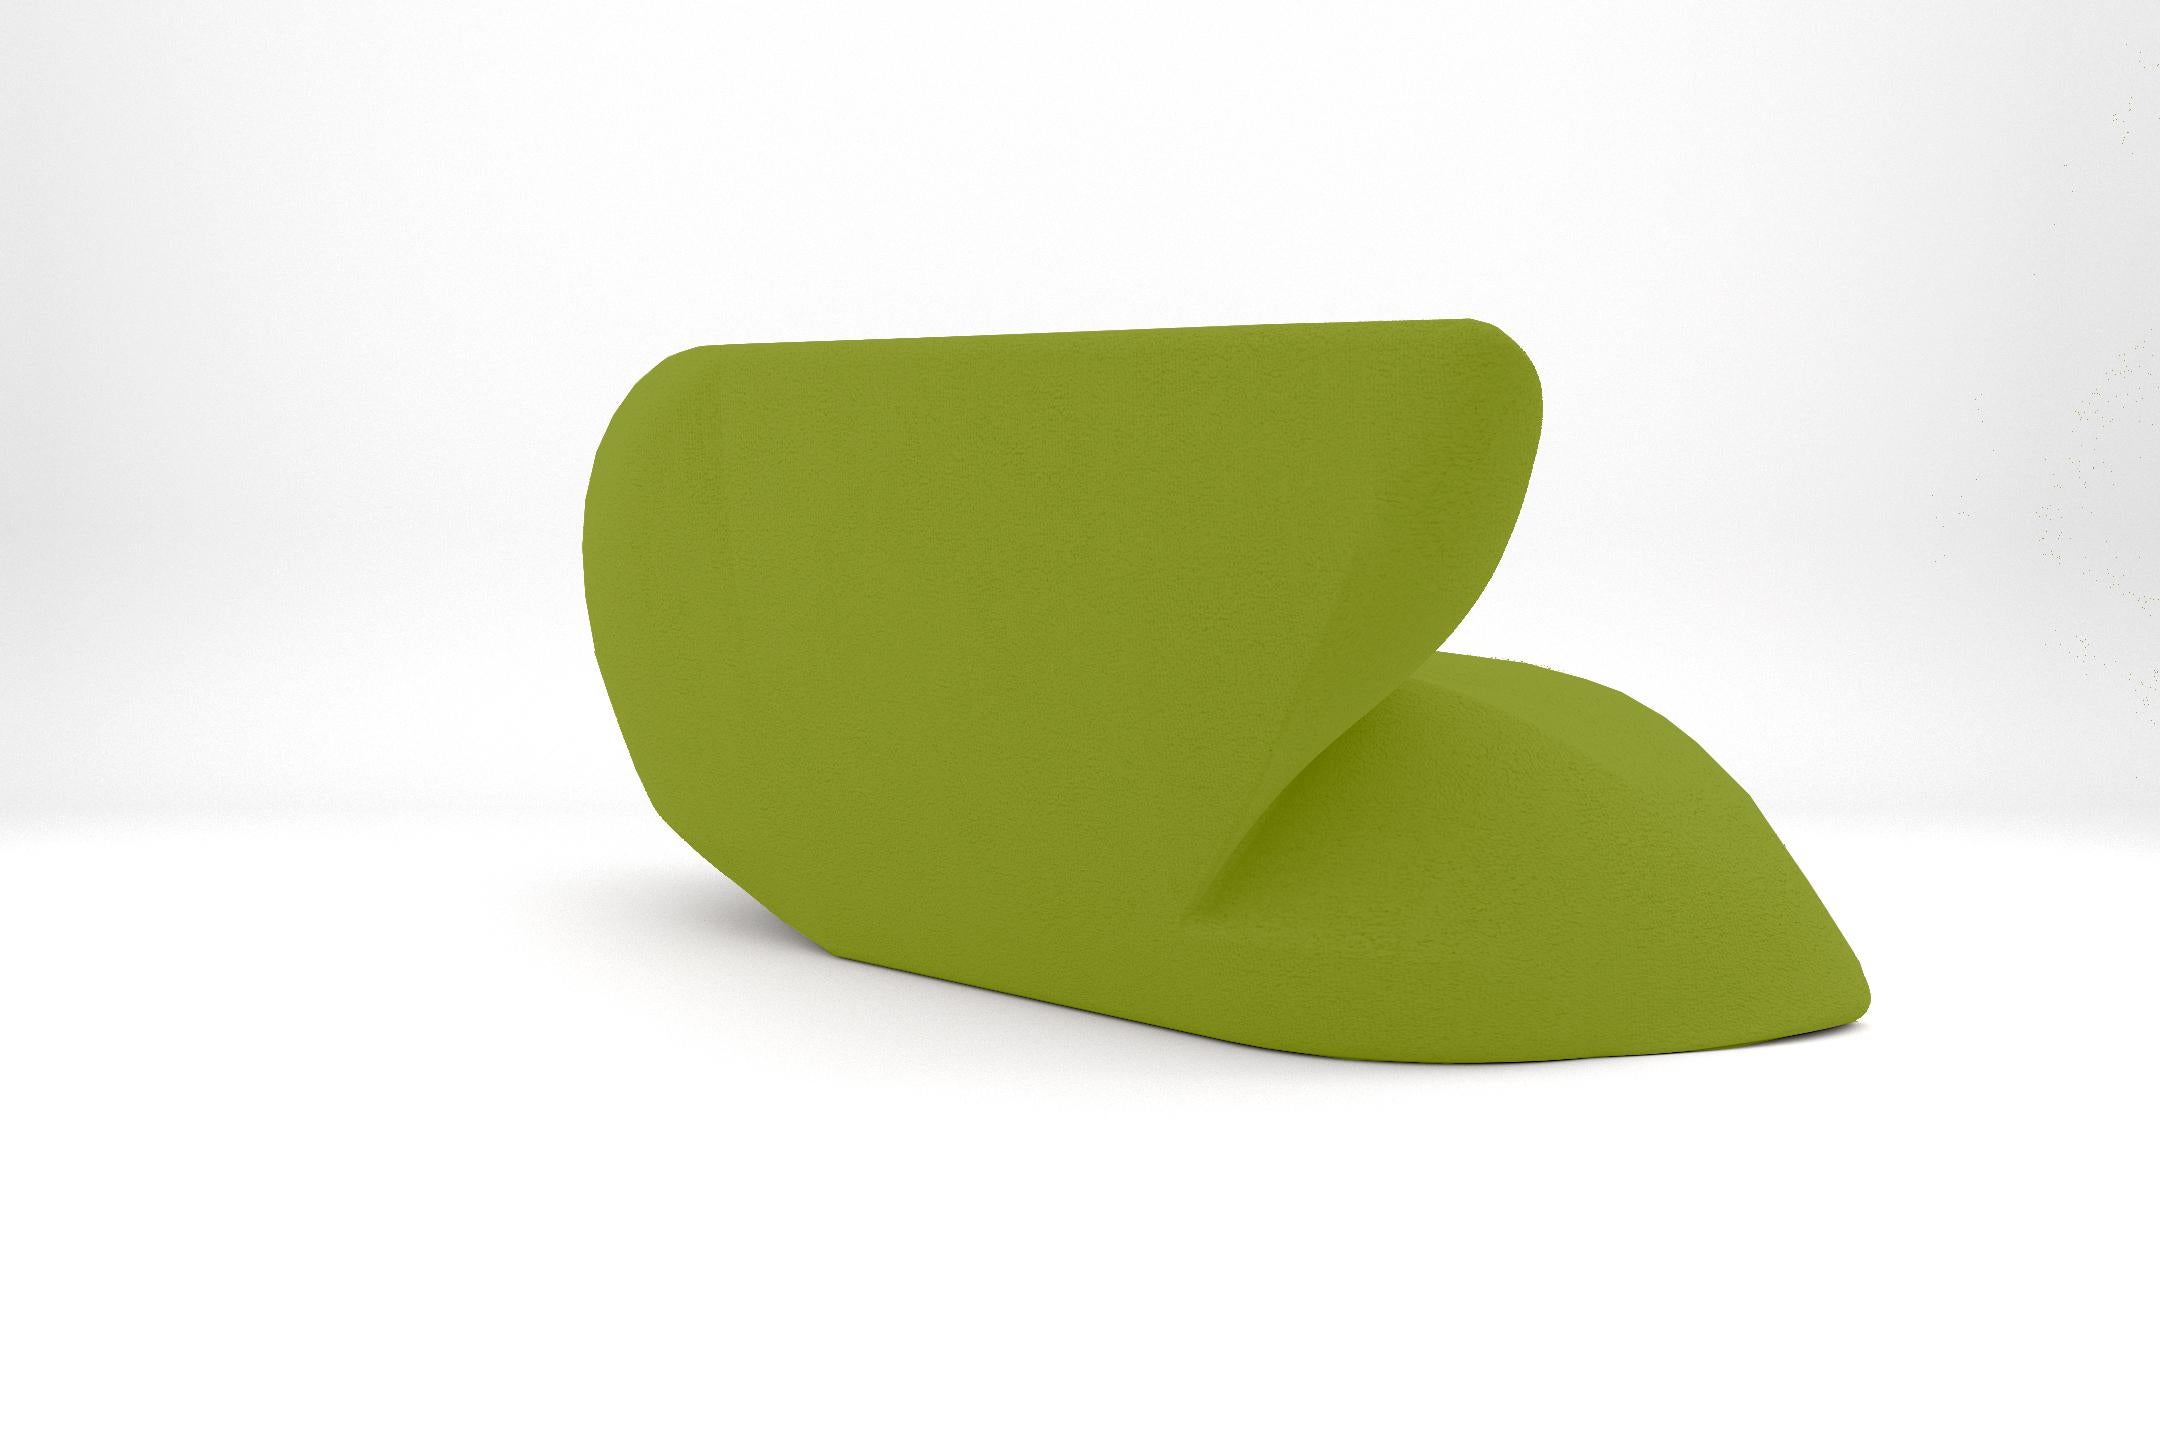 European Delta Sofa - Modern Lime Green Upholstered Two Seat Sofa For Sale